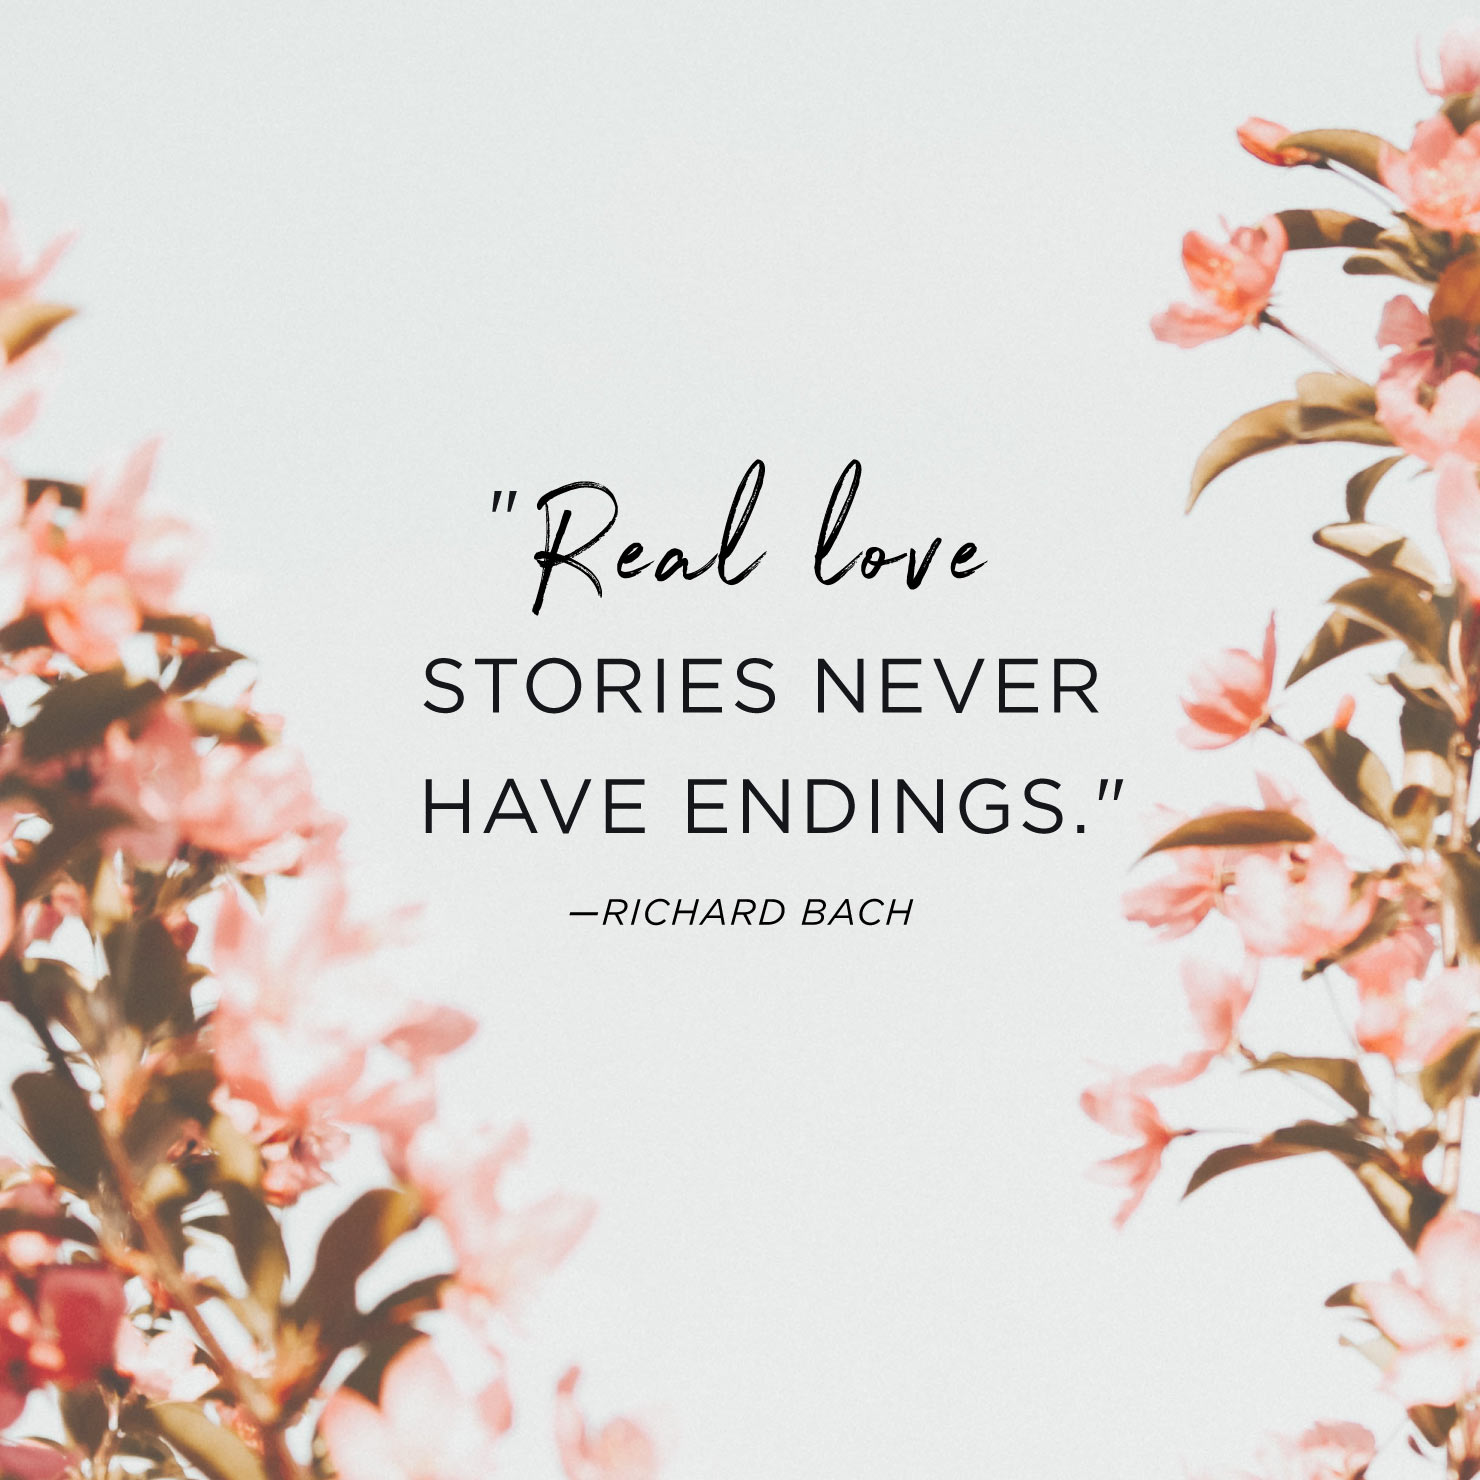 Quote above background image: Real love stories never have endings. - Richard Bach